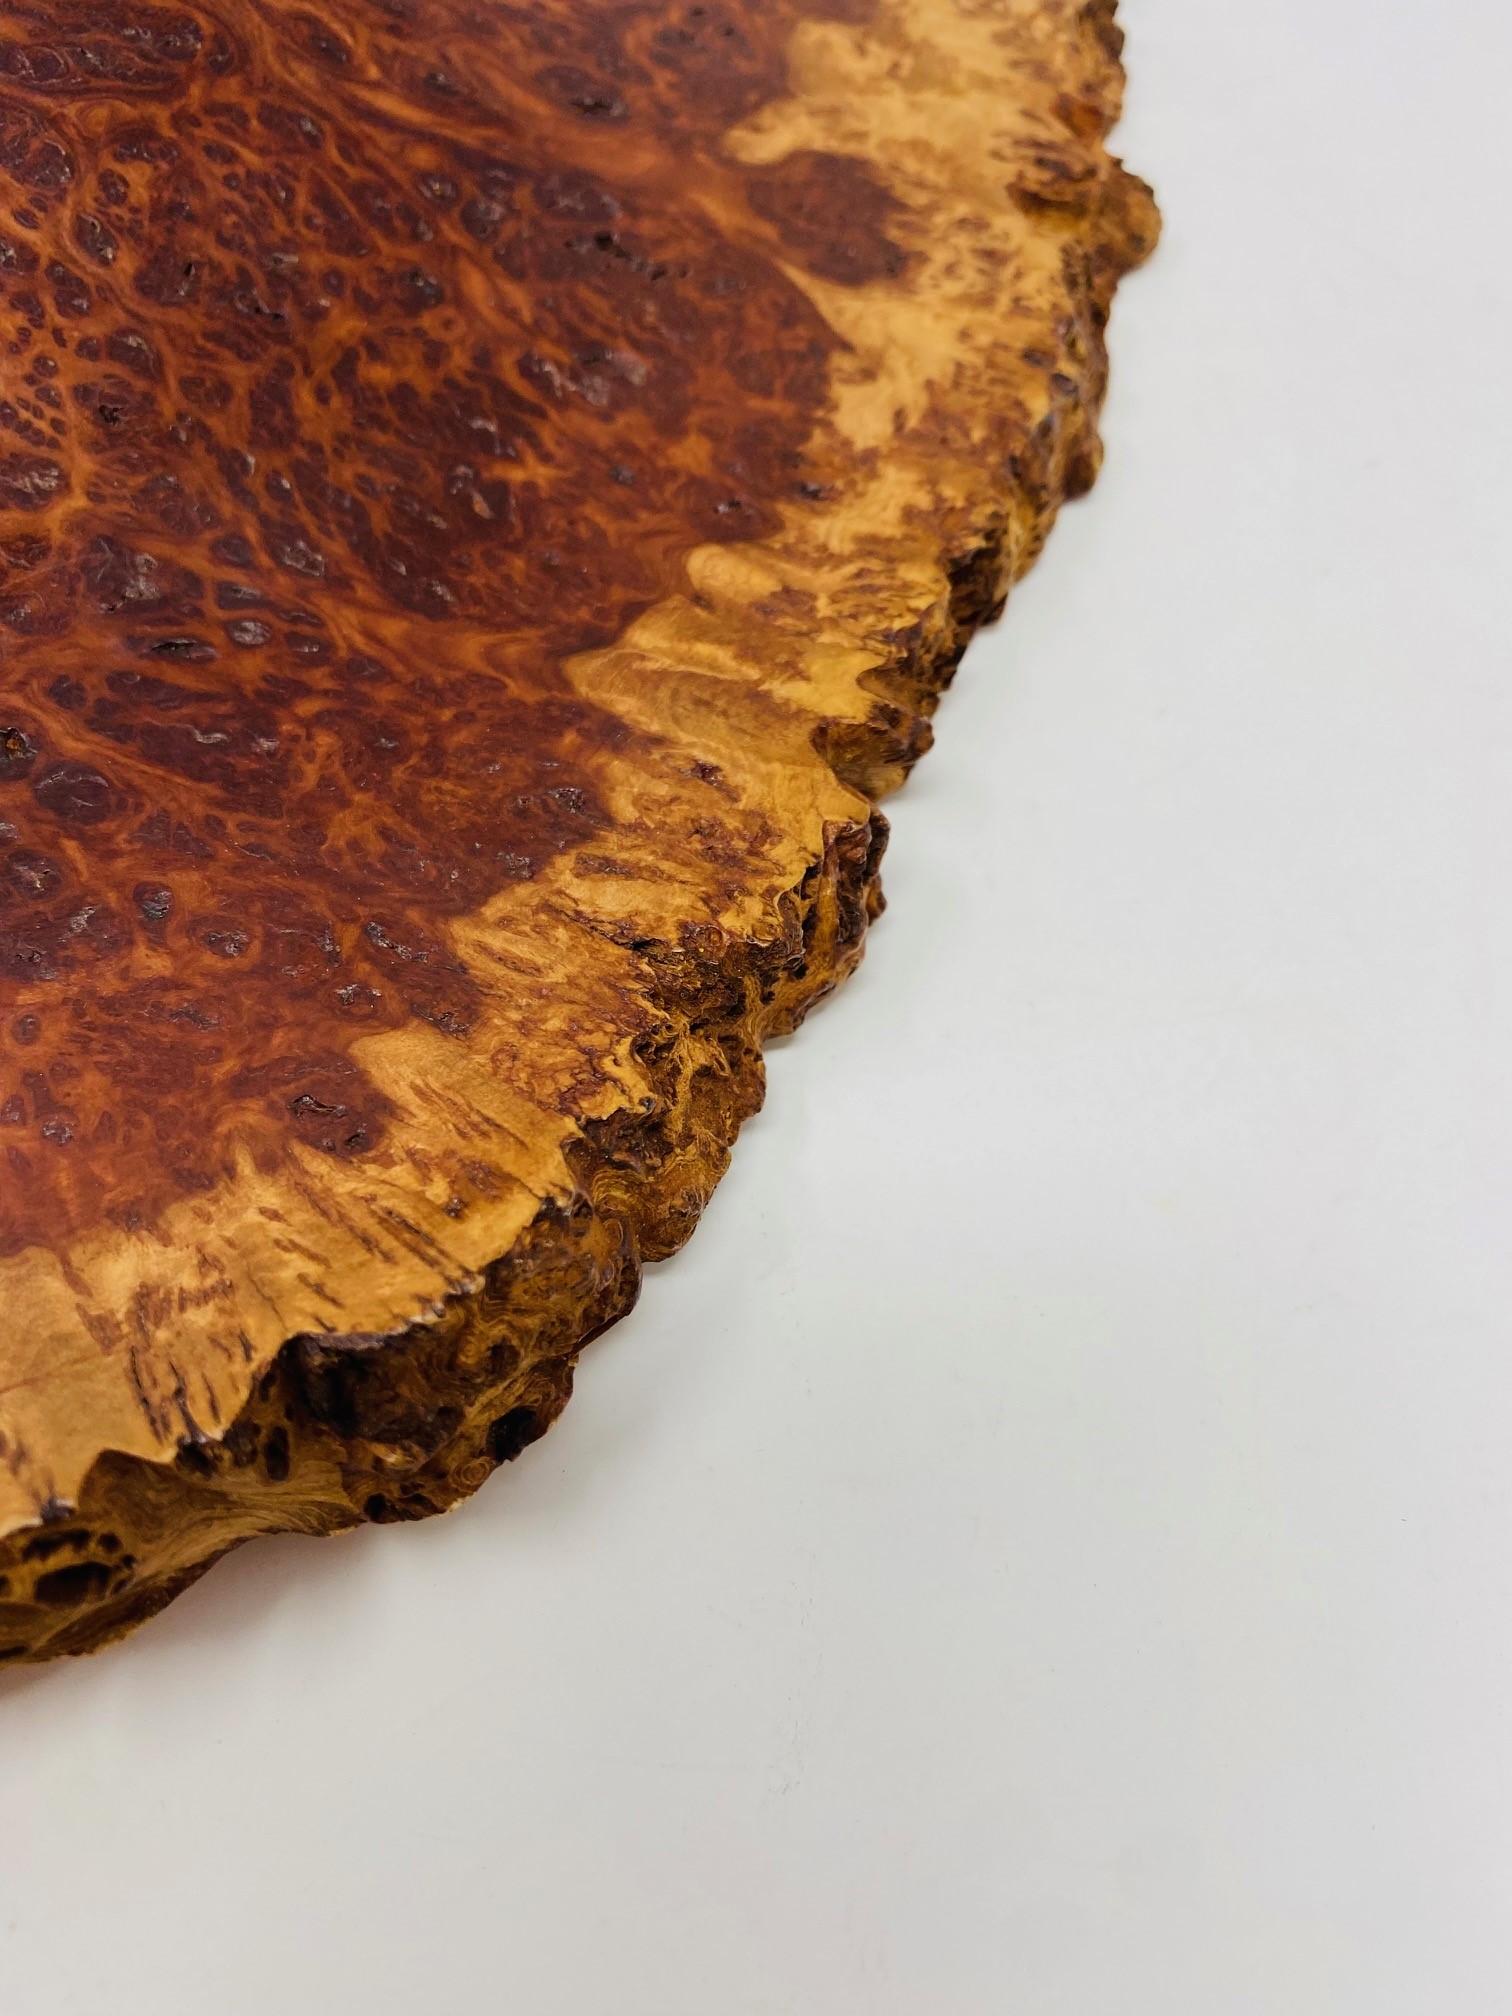 Hand-Crafted Live Edge Organic Modern Sculptural Burl Wood Bowl For Sale